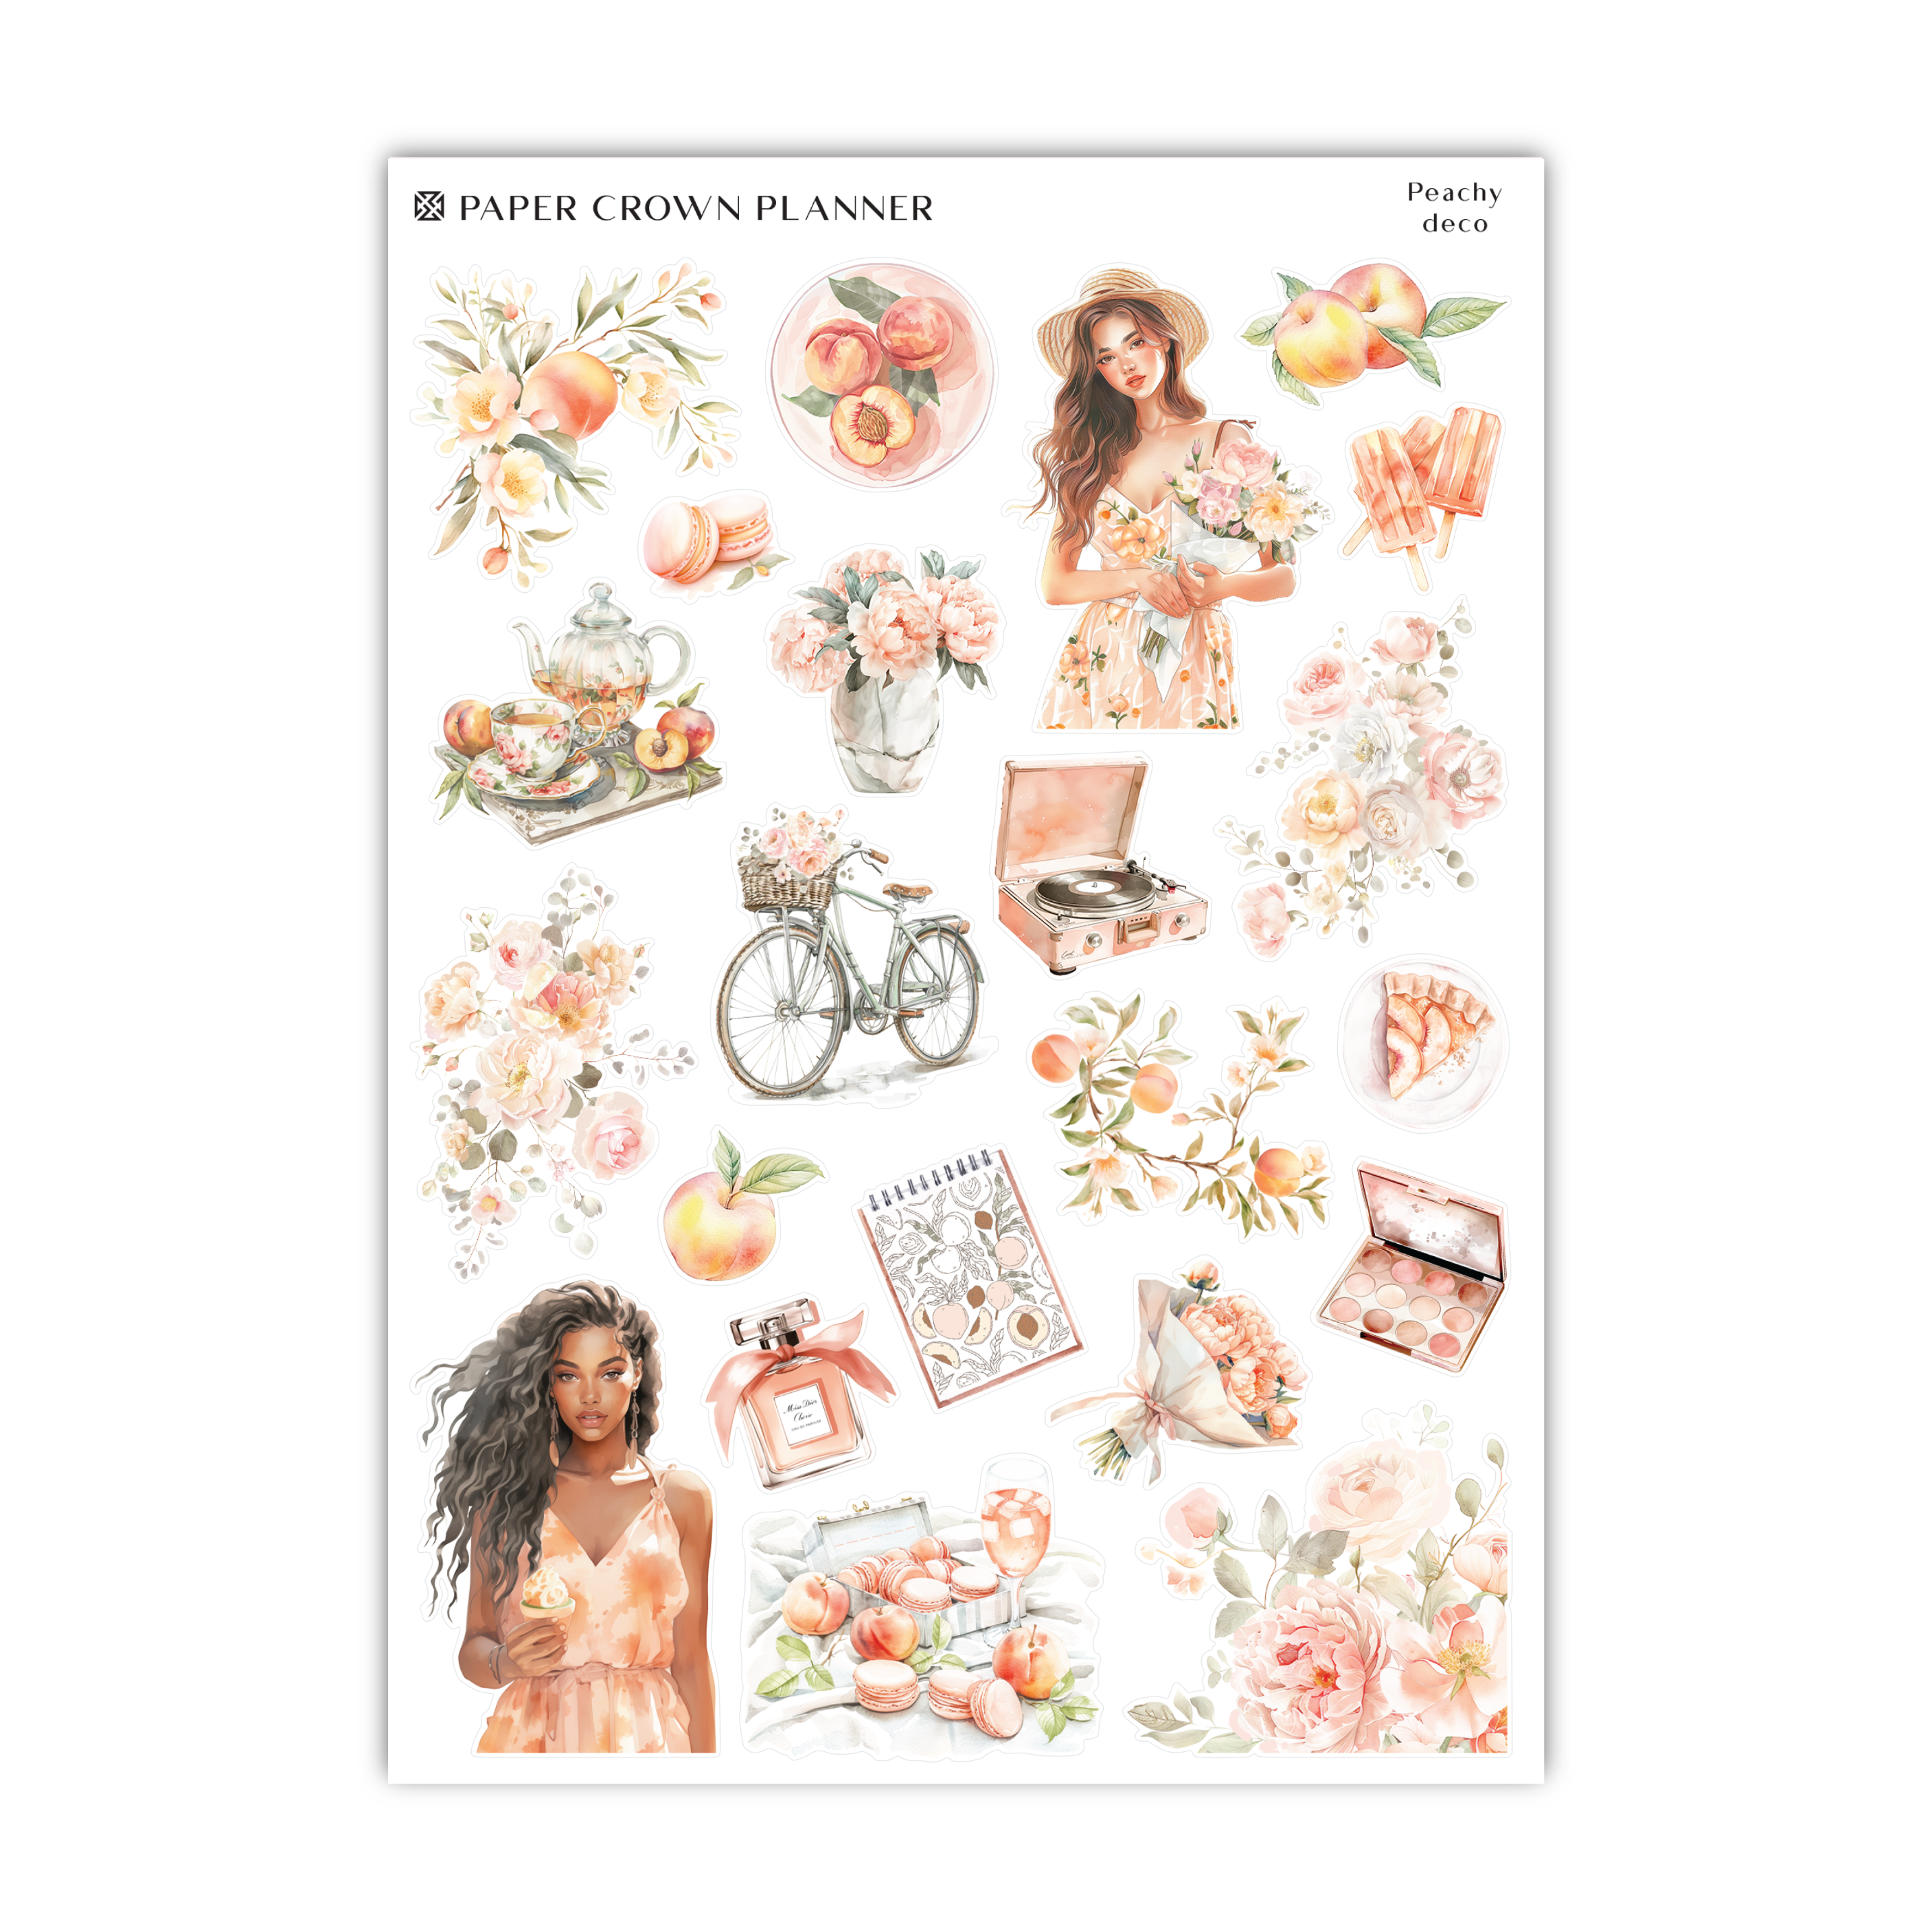 a sticker sheet with a woman surrounded by flowers